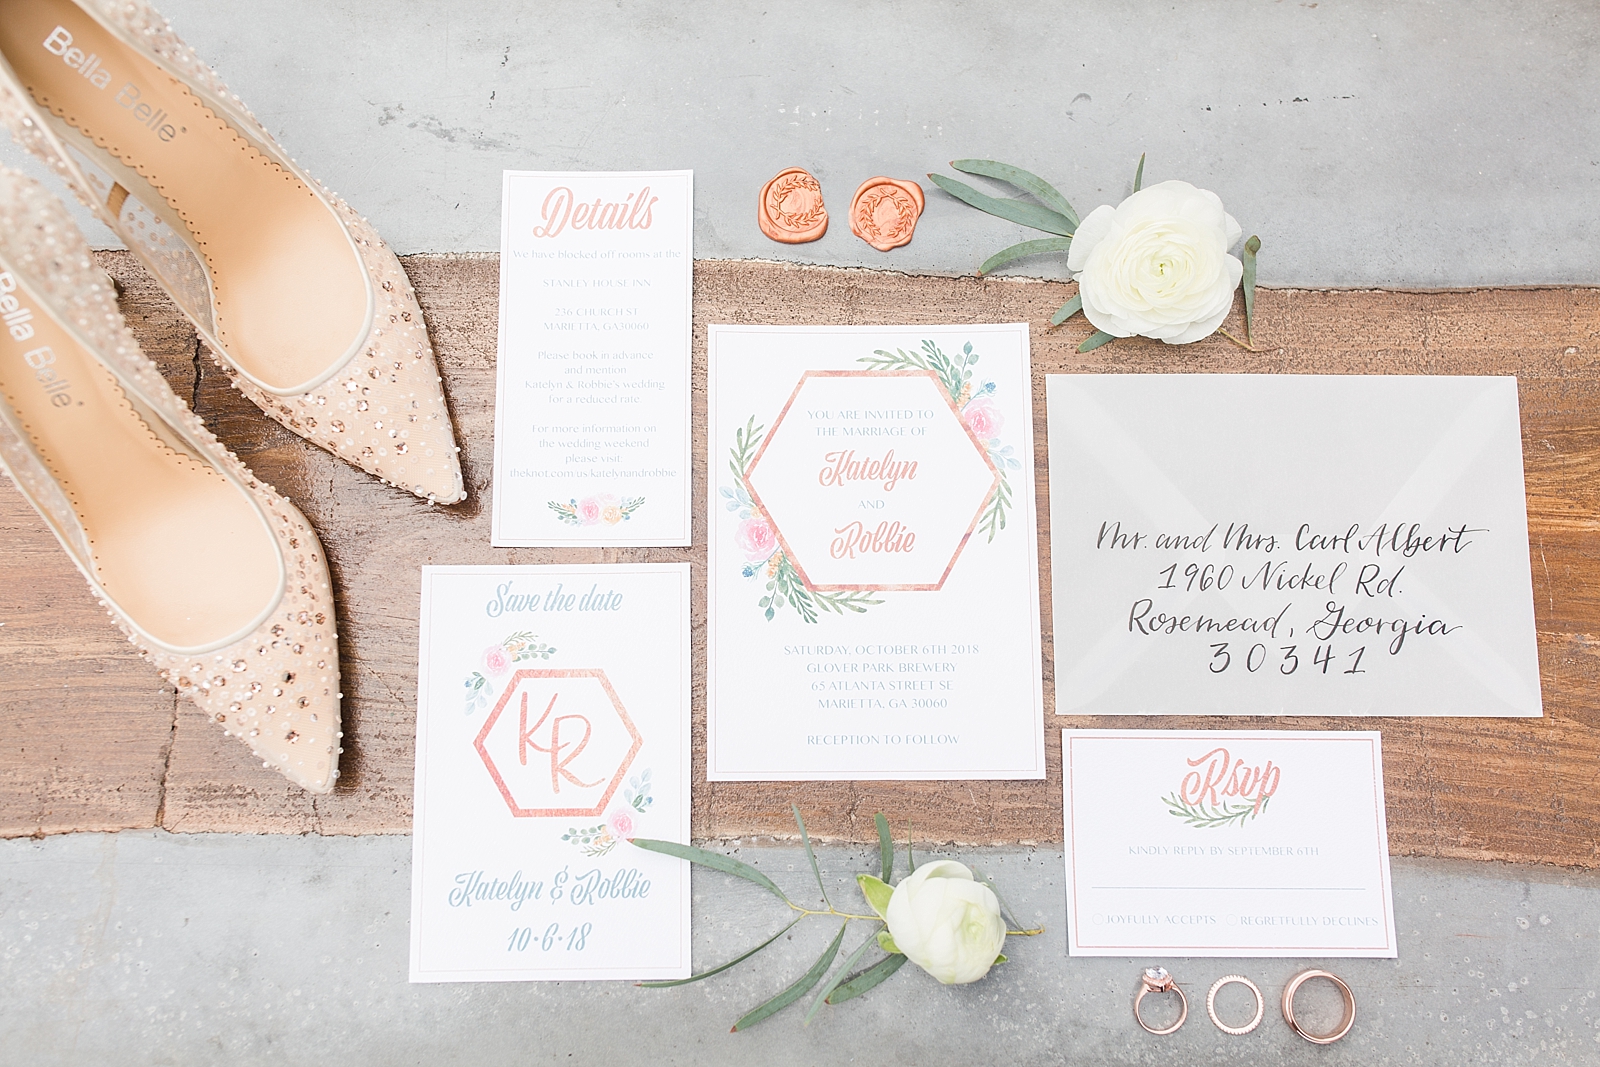 Glover Park Brewery Wedding Invitation Suite Rings and Bridal shoes on metal and wood table Photo